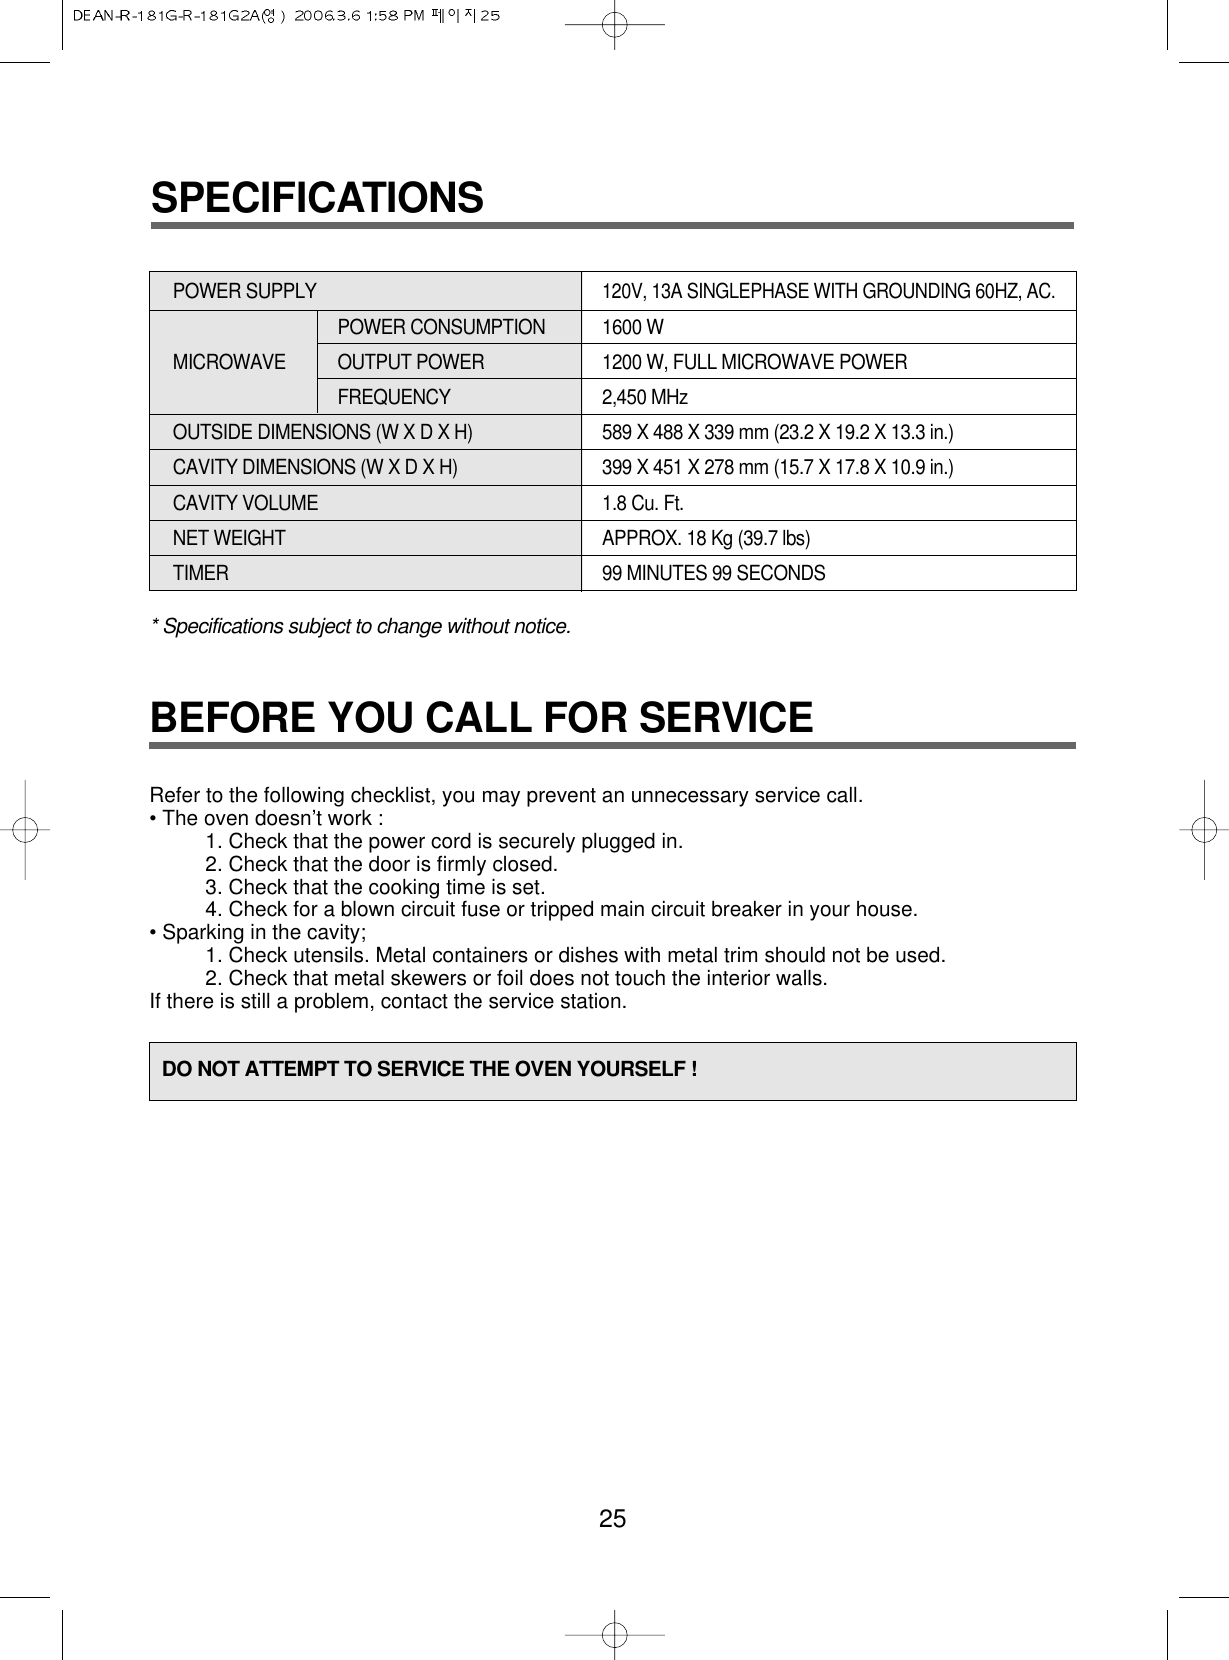 BEFORE YOU CALL FOR SERVICERefer to the following checklist, you may prevent an unnecessary service call.• The oven doesn’t work :1. Check that the power cord is securely plugged in.2. Check that the door is firmly closed.3. Check that the cooking time is set.4. Check for a blown circuit fuse or tripped main circuit breaker in your house.• Sparking in the cavity;1. Check utensils. Metal containers or dishes with metal trim should not be used.2. Check that metal skewers or foil does not touch the interior walls.If there is still a problem, contact the service station.25DO NOT ATTEMPT TO SERVICE THE OVEN YOURSELF !* Specifications subject to change without notice.POWER SUPPLY 120V, 13A SINGLEPHASE WITH GROUNDING 60HZ, AC.POWER CONSUMPTION  1600 WMICROWAVE OUTPUT POWER 1200 W, FULL MICROWAVE POWER FREQUENCY 2,450 MHzOUTSIDE DIMENSIONS (W X D X H)   589 X 488 X 339 mm (23.2 X 19.2 X 13.3 in.)CAVITY DIMENSIONS (W X D X H)  399 X 451 X 278 mm (15.7 X 17.8 X 10.9 in.)CAVITY VOLUME 1.8 Cu. Ft.NET WEIGHT APPROX. 18 Kg (39.7 lbs)TIMER 99 MINUTES 99 SECONDSSPECIFICATIONS